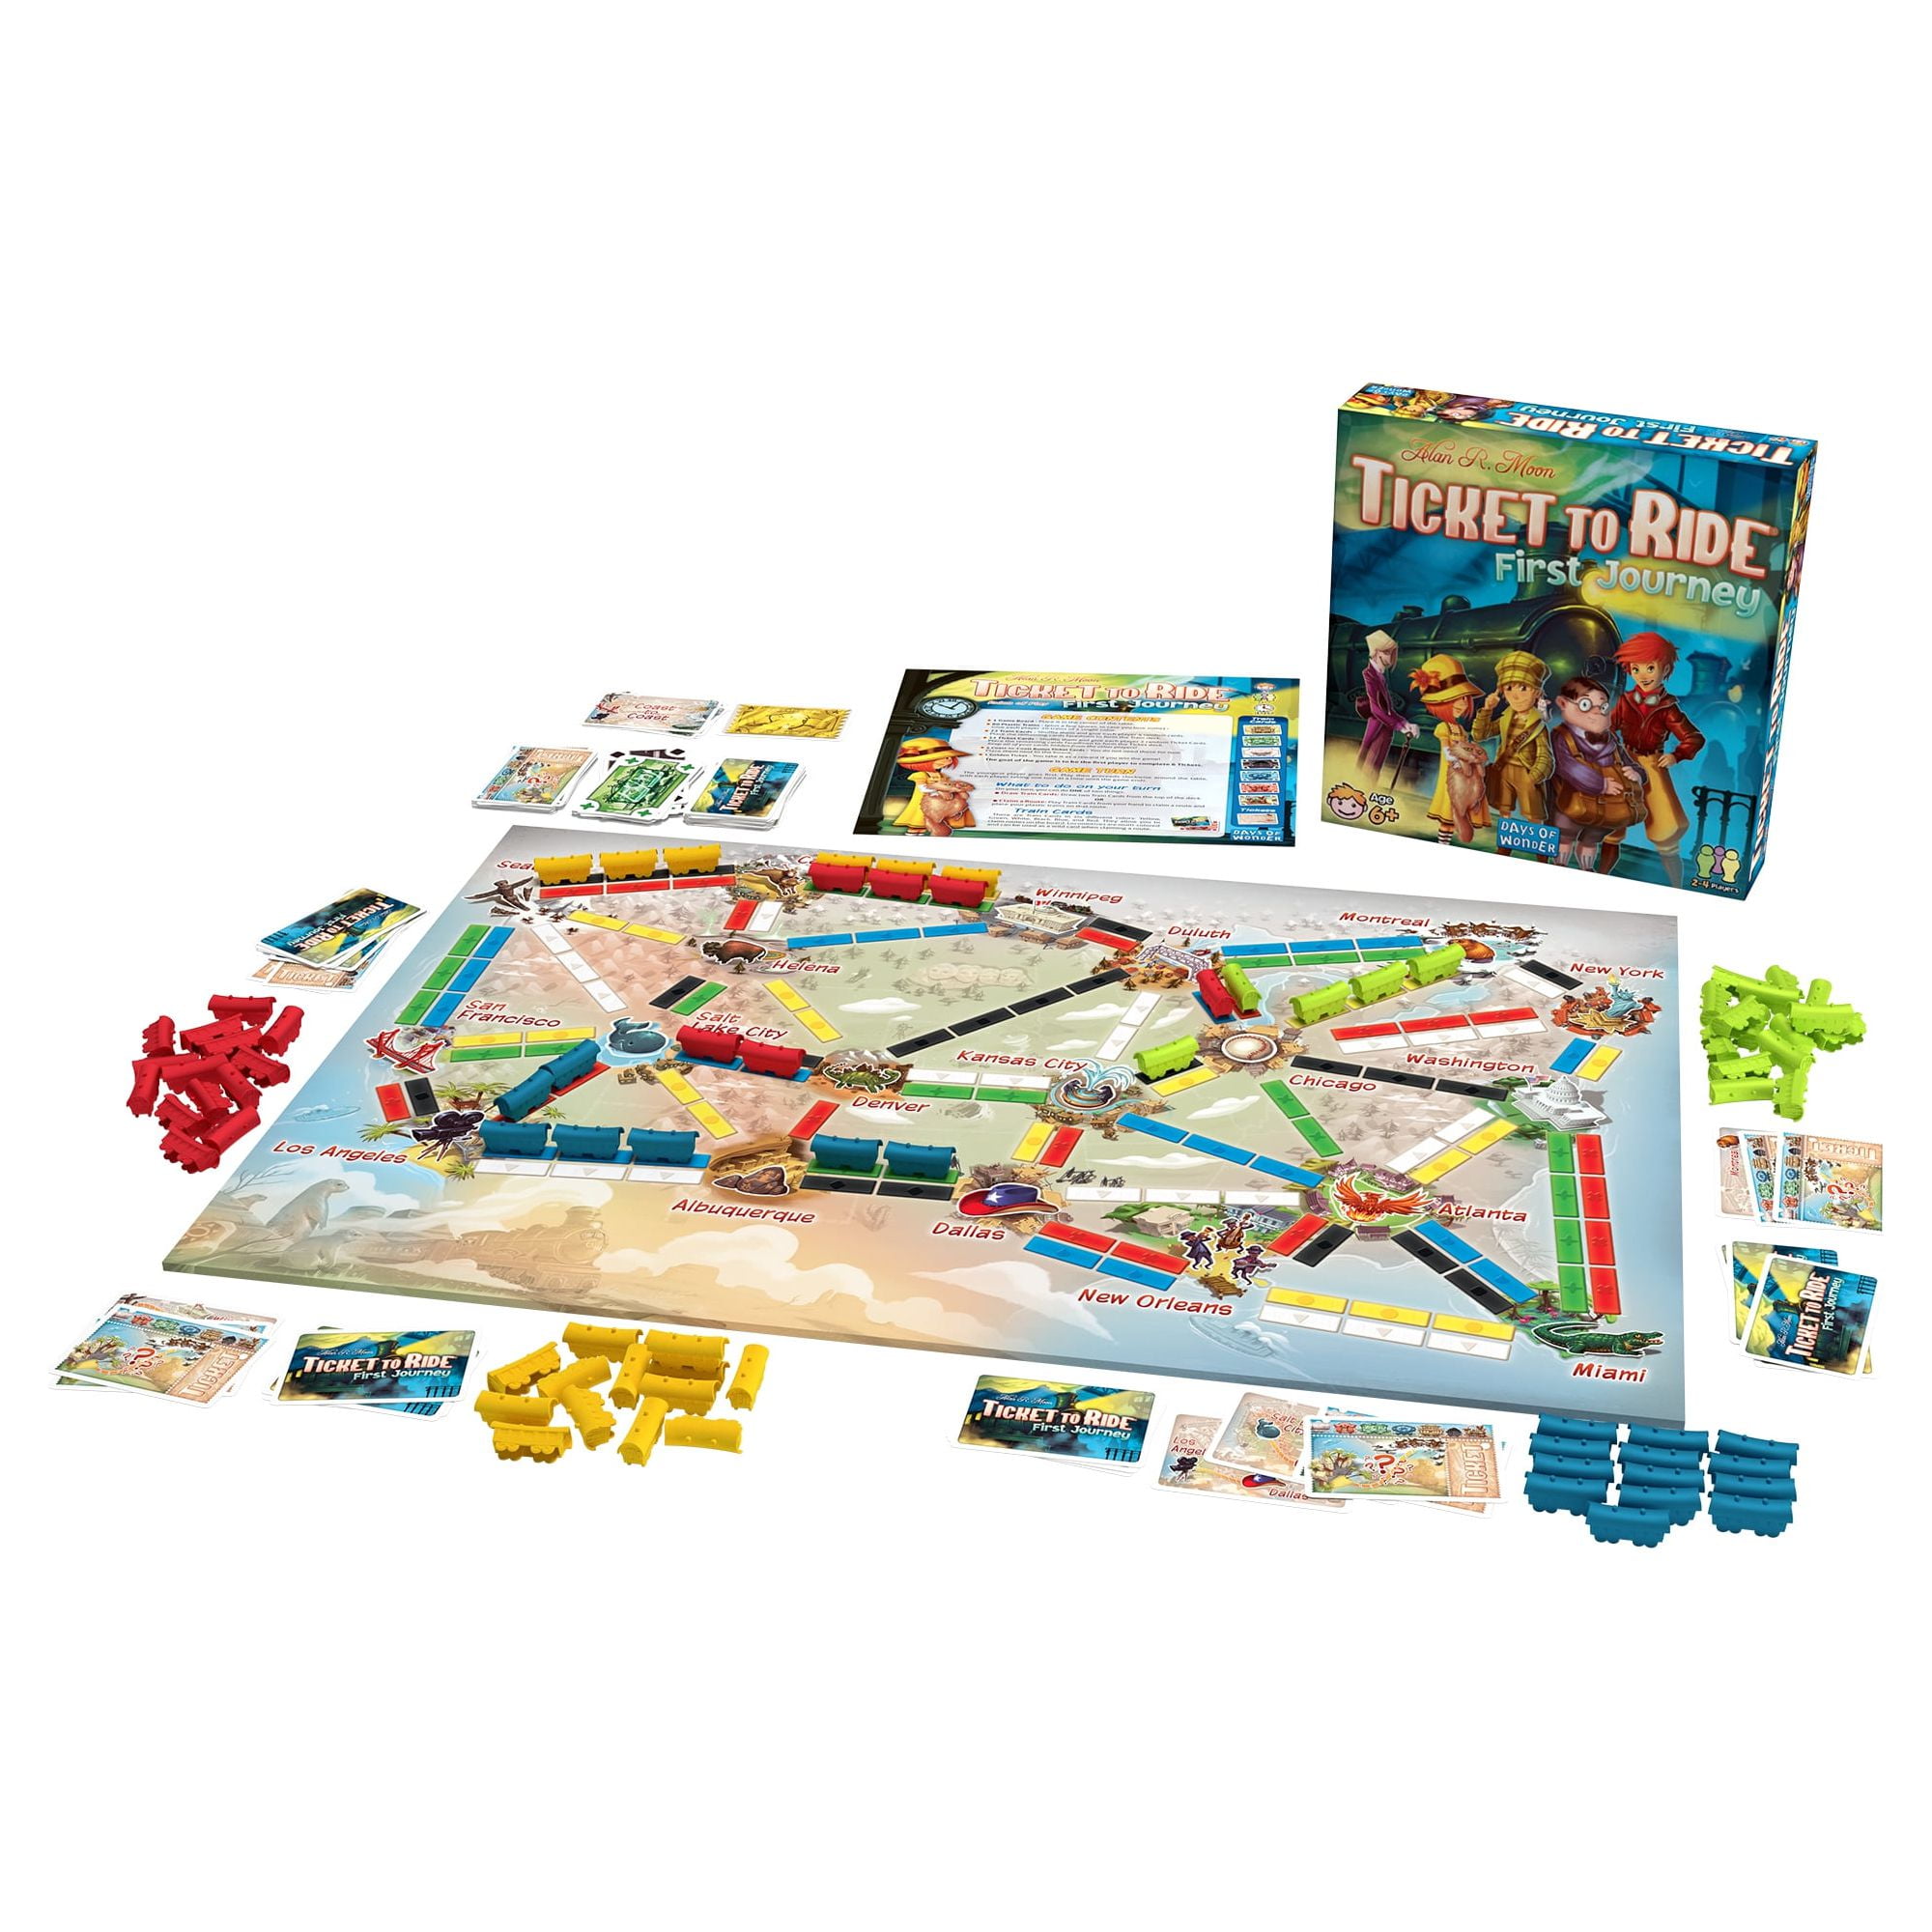 Ticket to Ride First Journey Board Game - Fun and Easy for Young Explorers!  Train Strategy Game, Family Game for Kids & Adults, Ages 6+, 2-4 Players